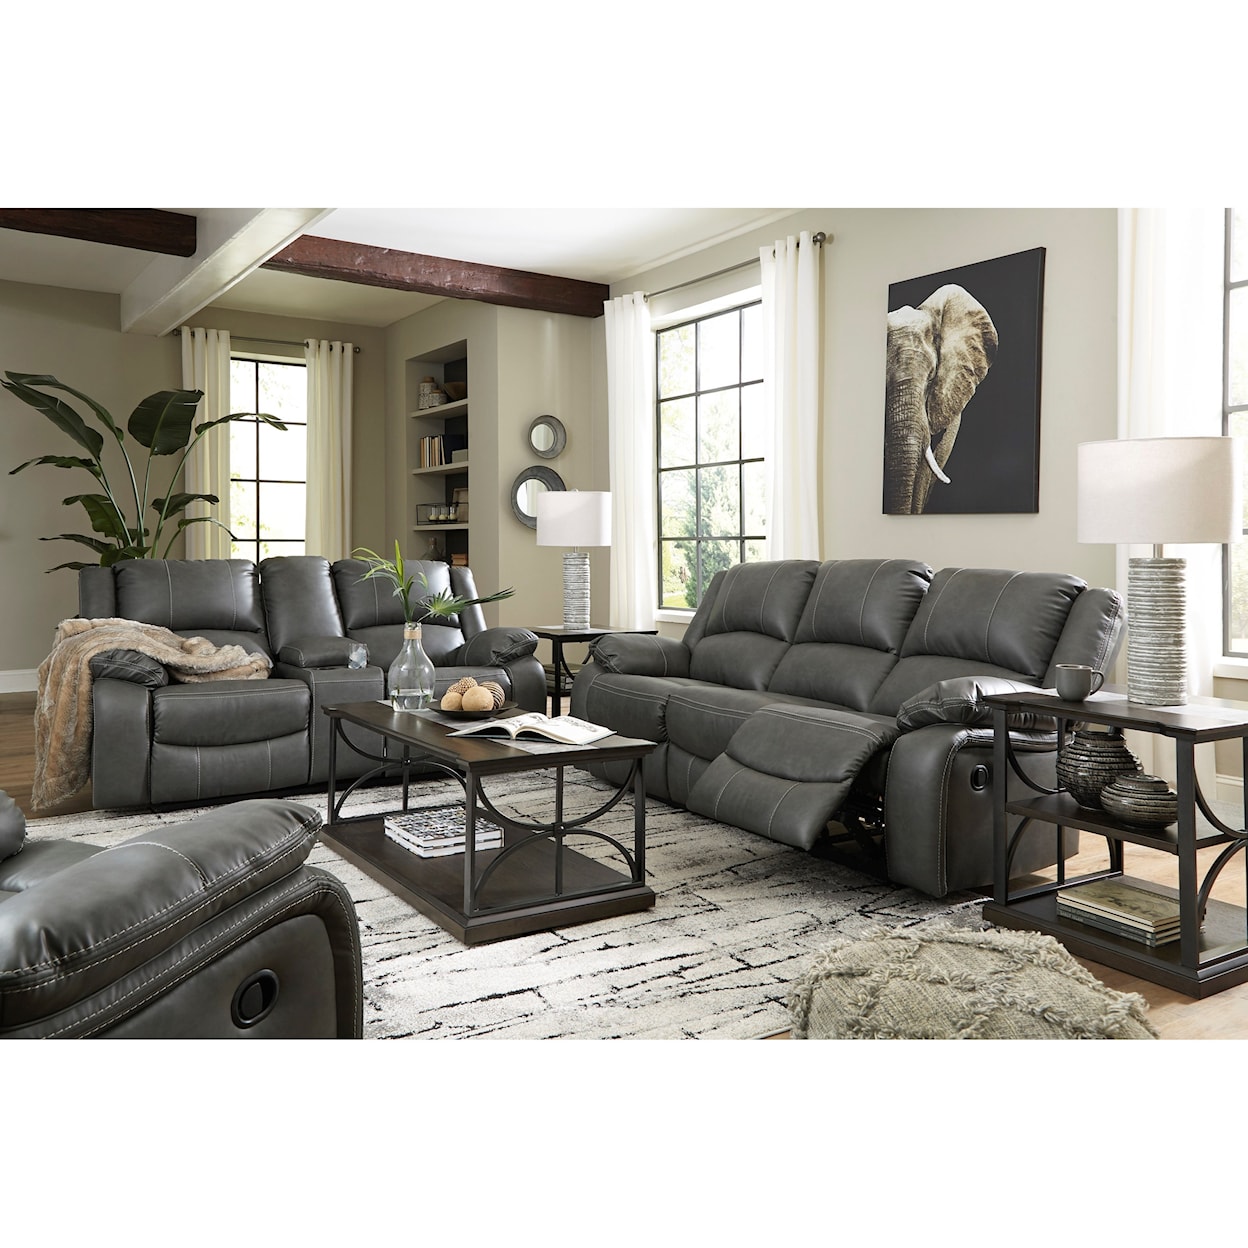 Signature Design by Ashley Furniture Calderwell Reclining Living Room Group